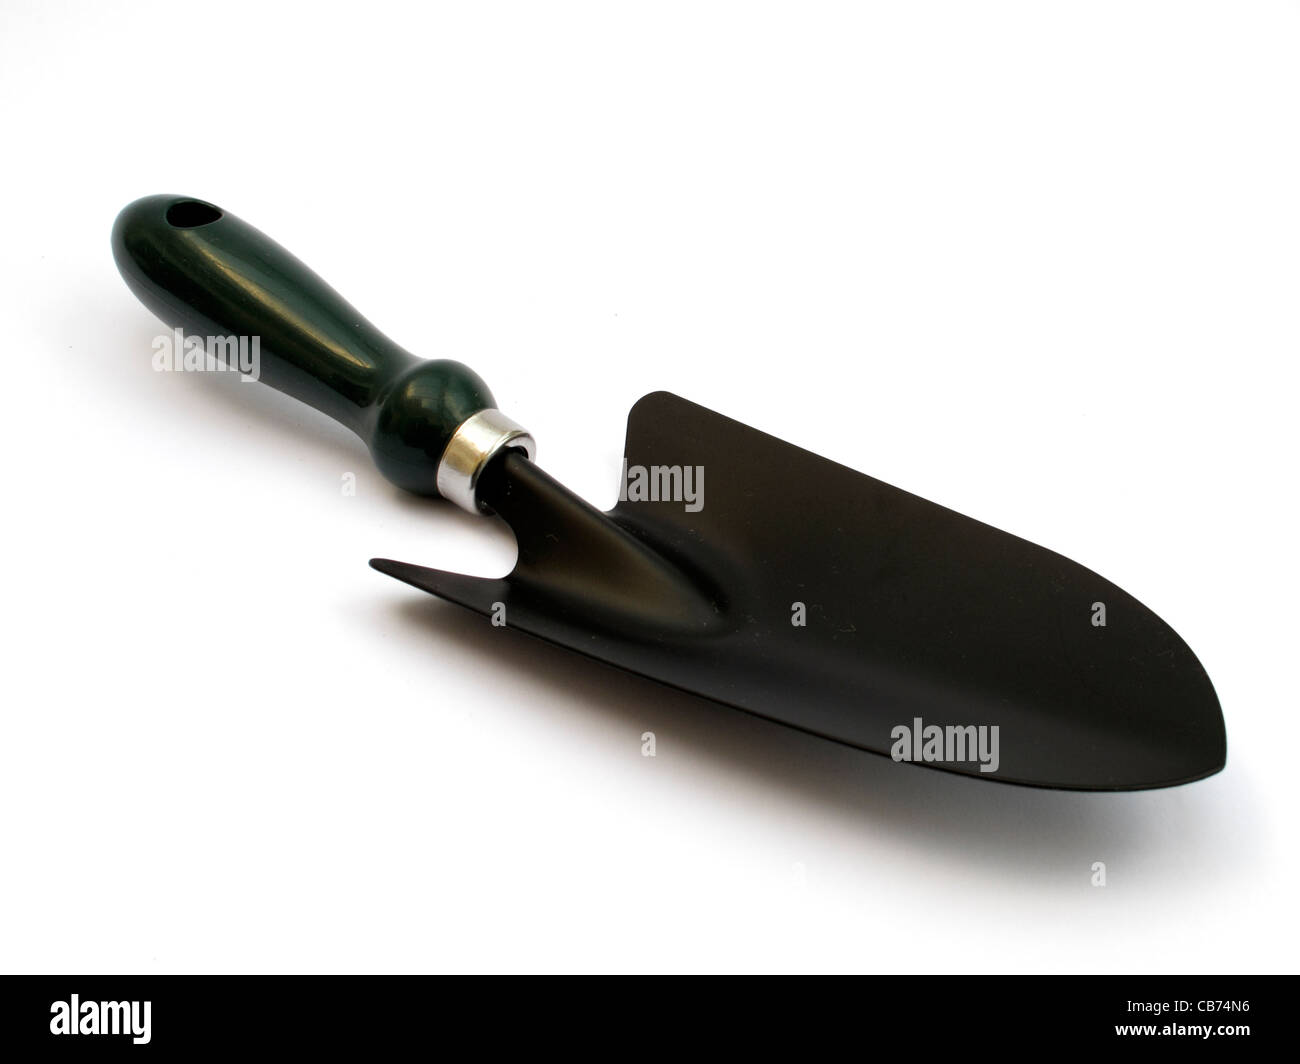 Cutout of garden trowel on a white background Stock Photo